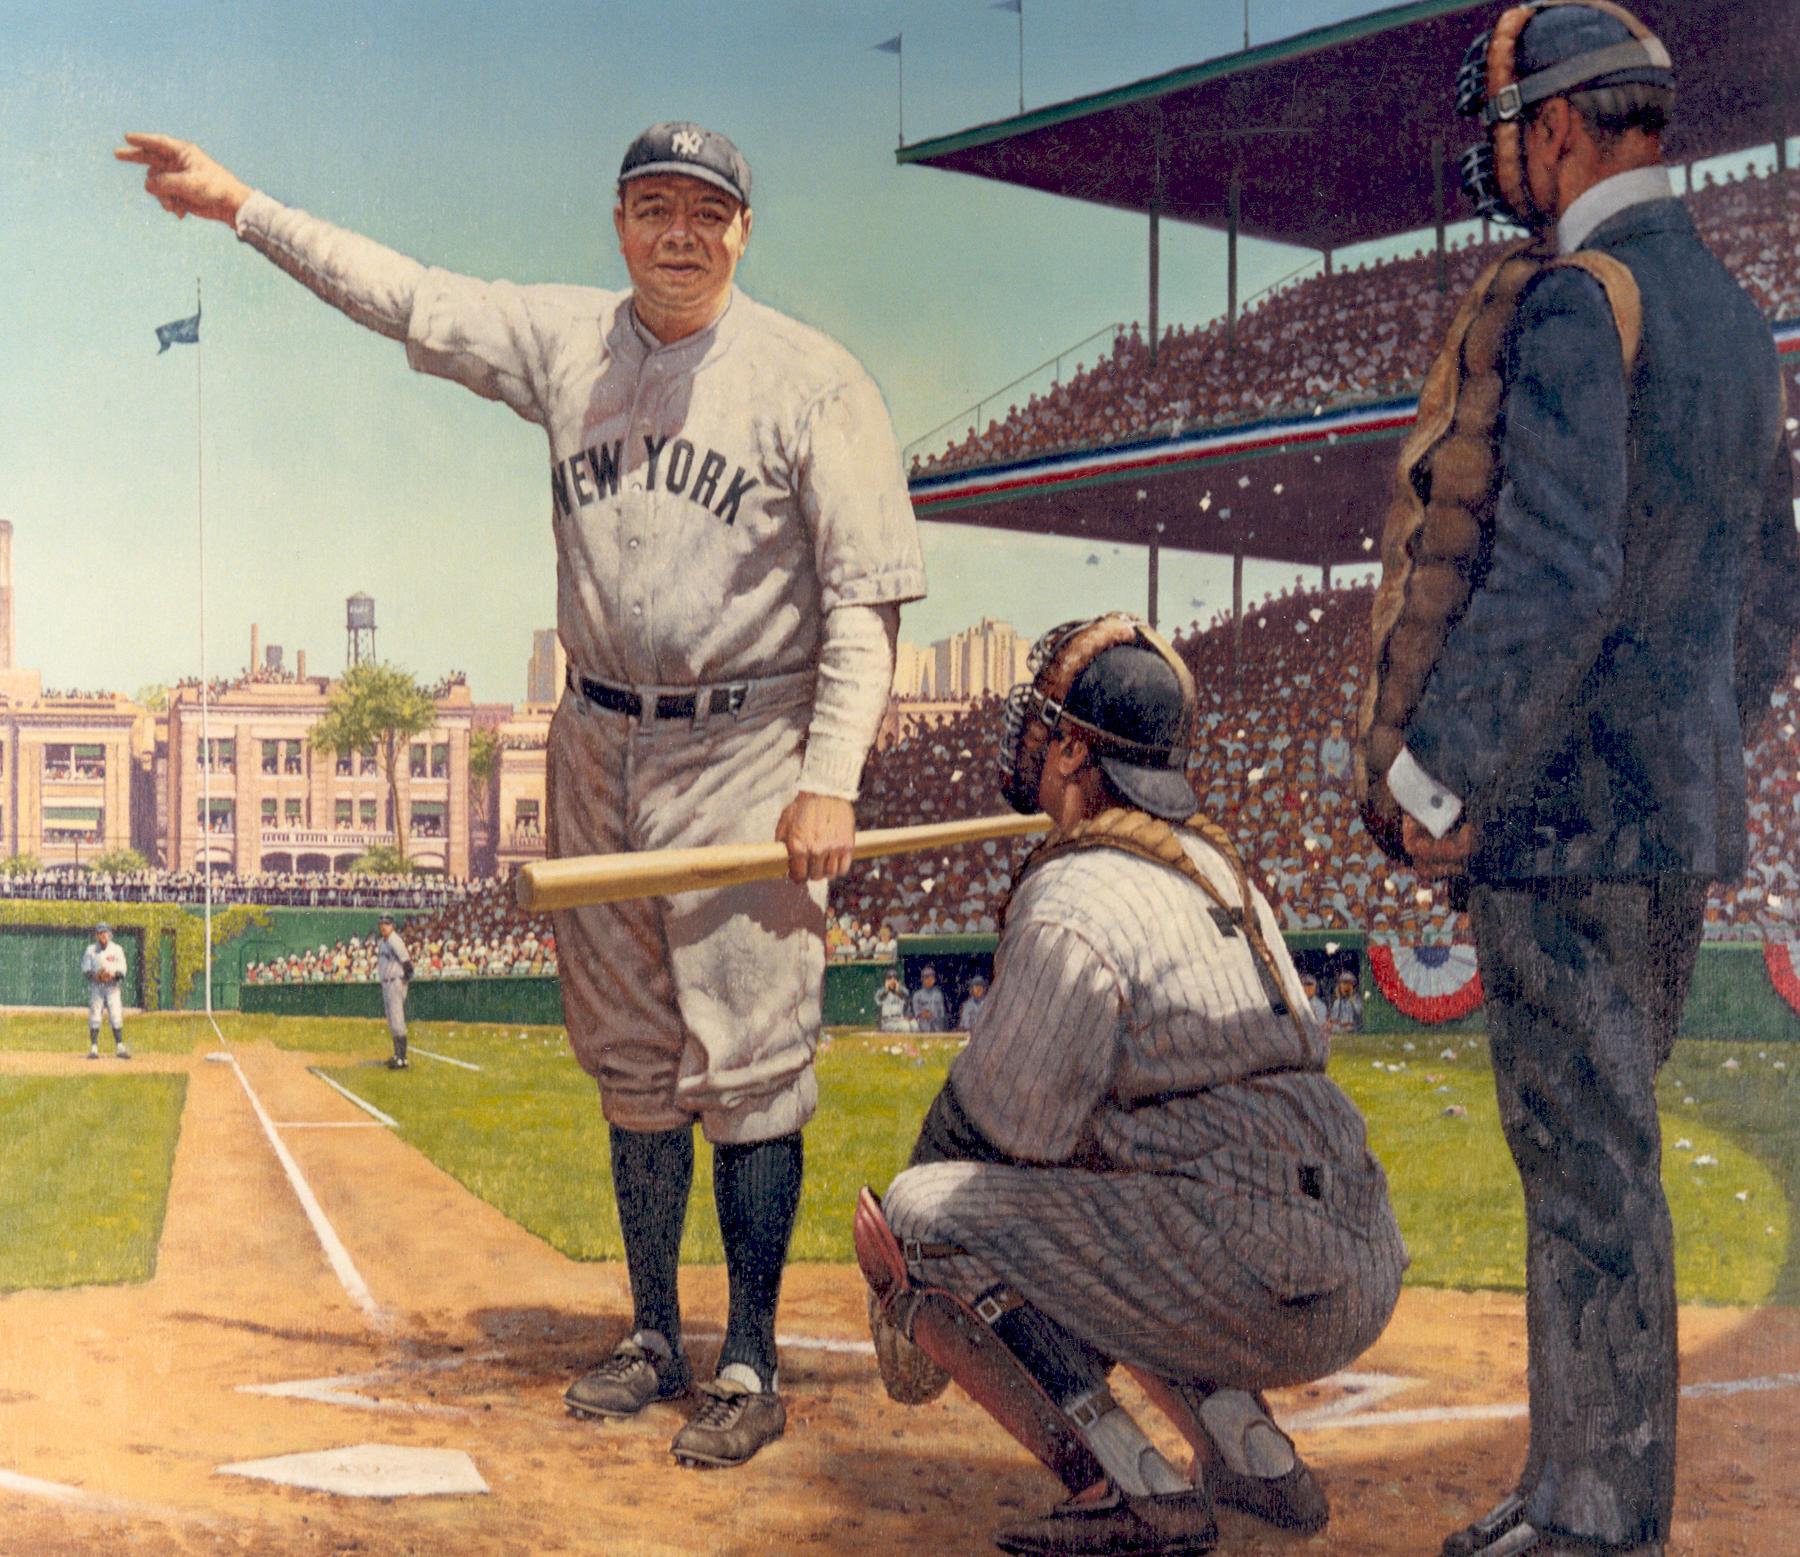 A detail from Robert Thom's painting depicting Babe Ruth’s "Calle...